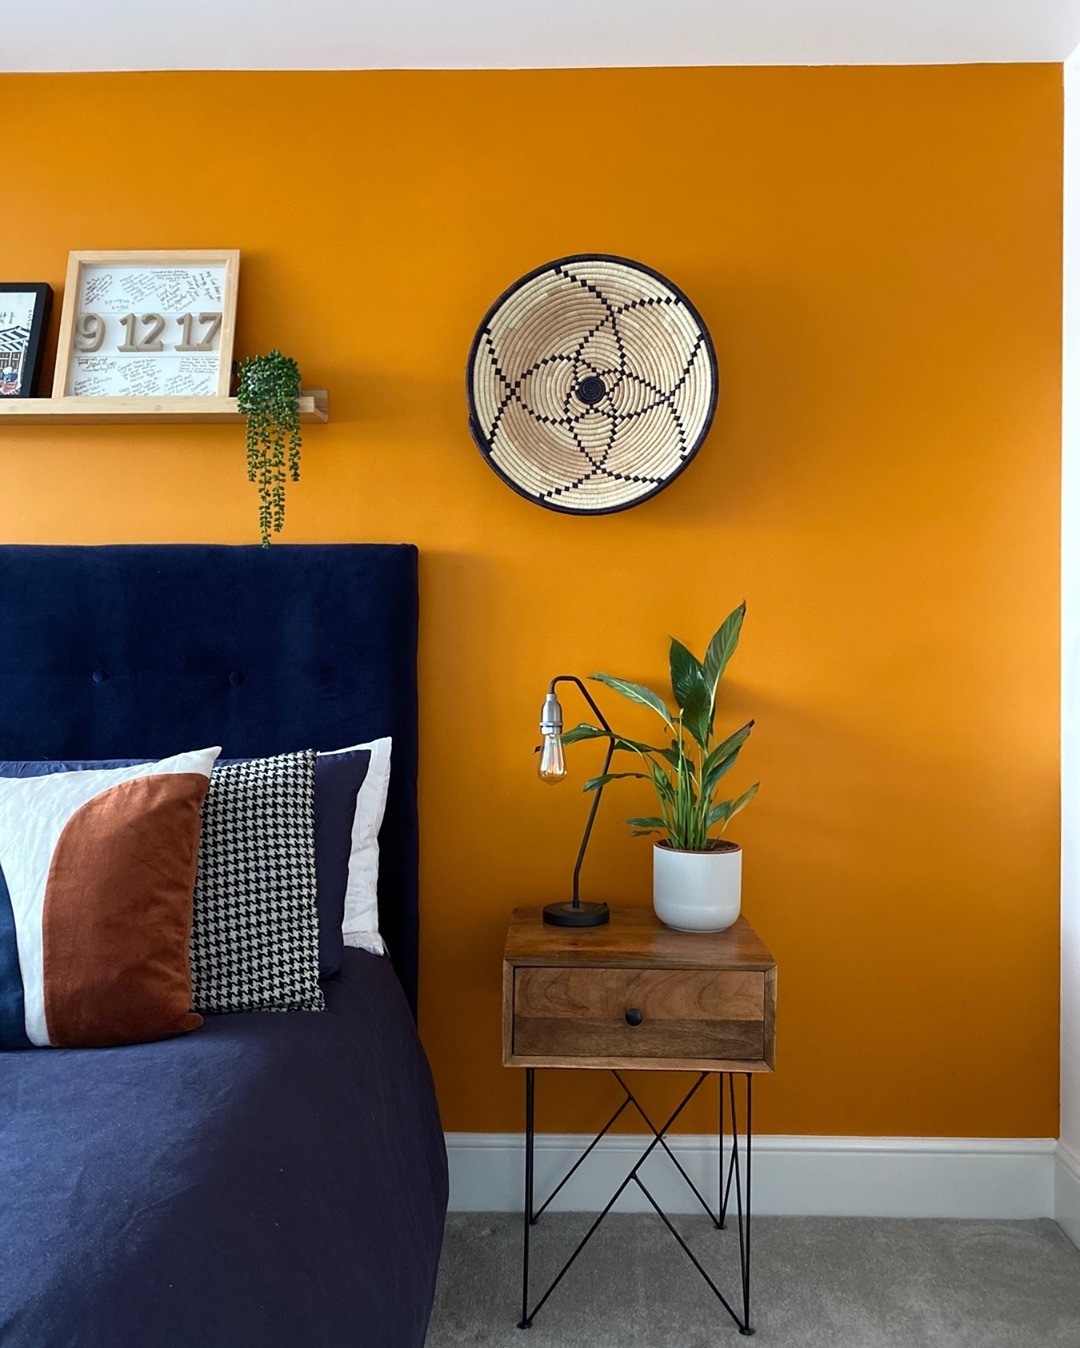 Deep navy bed against a bright orange wall.